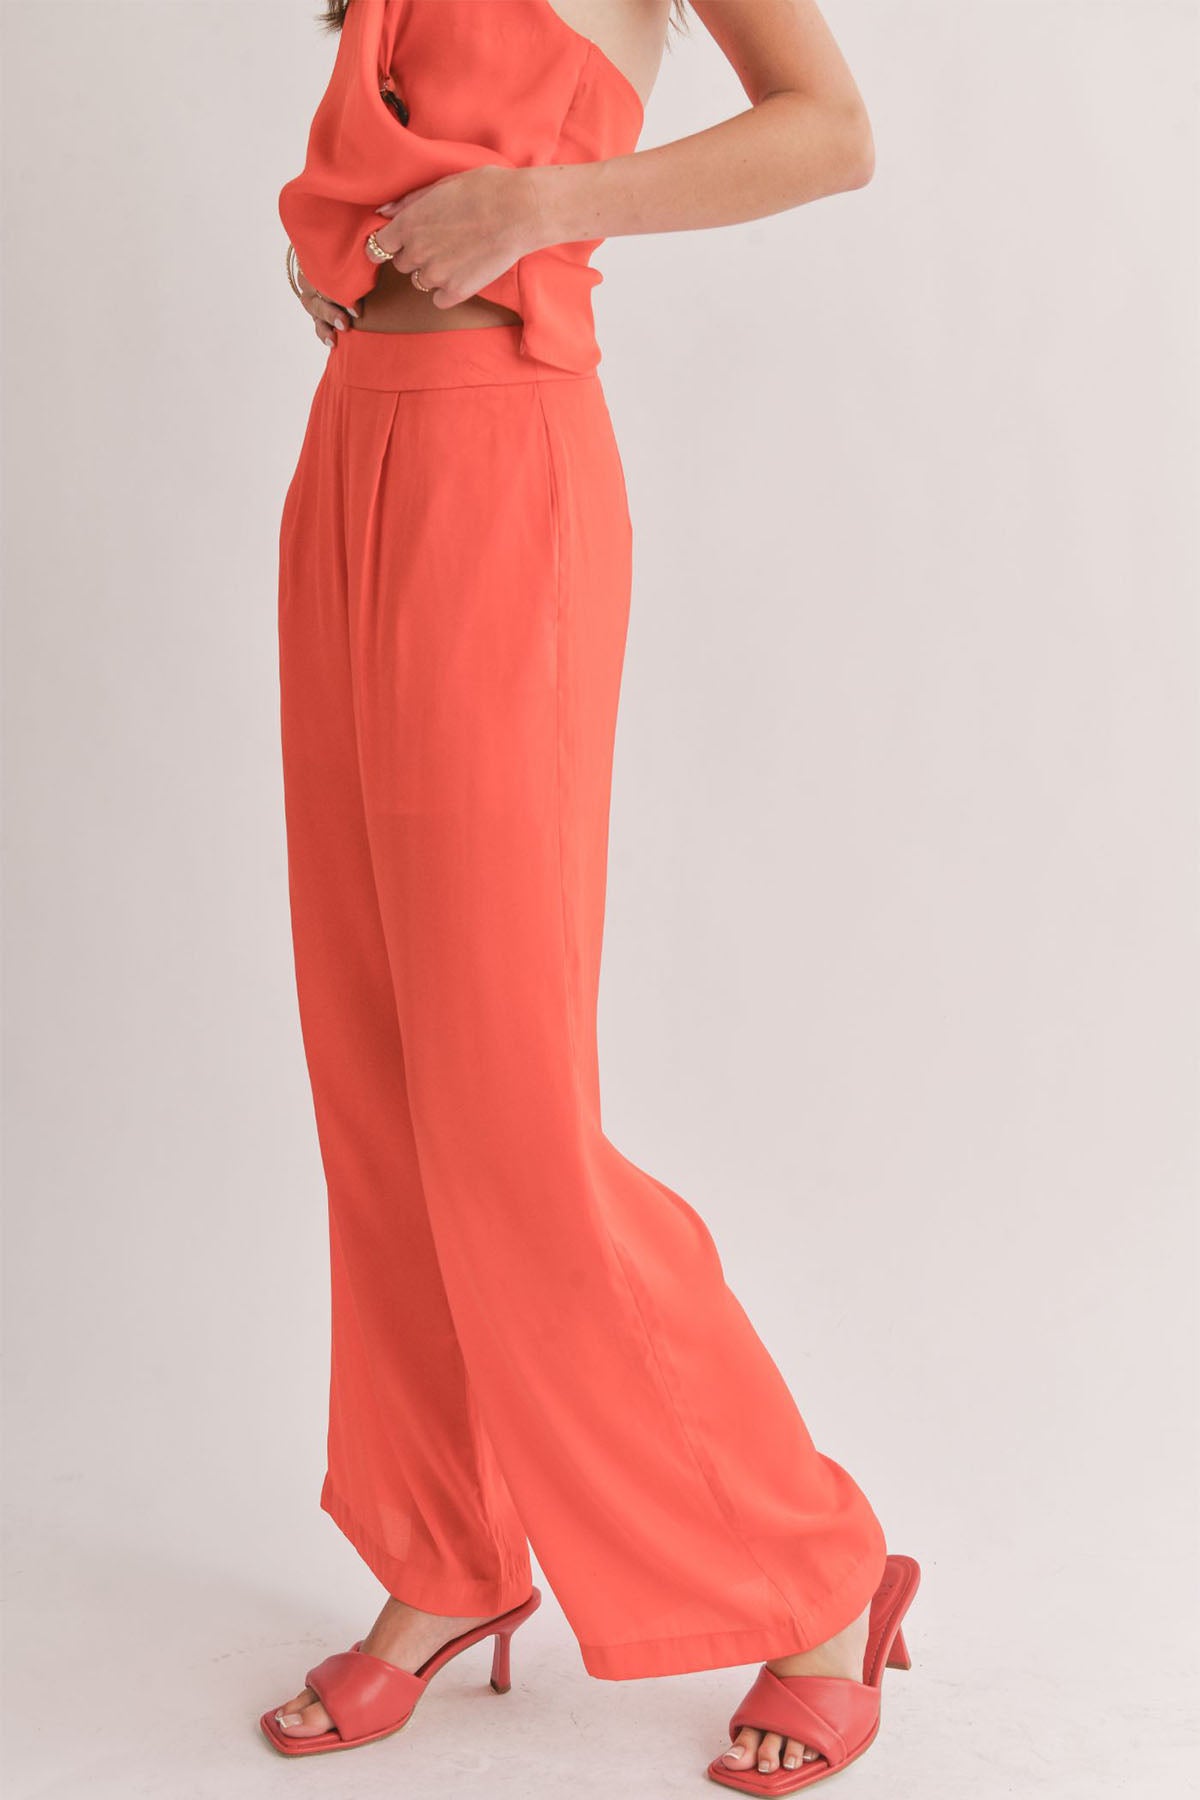 Sage the Label - Dream Skies Wide Leg Pant - Red - Side